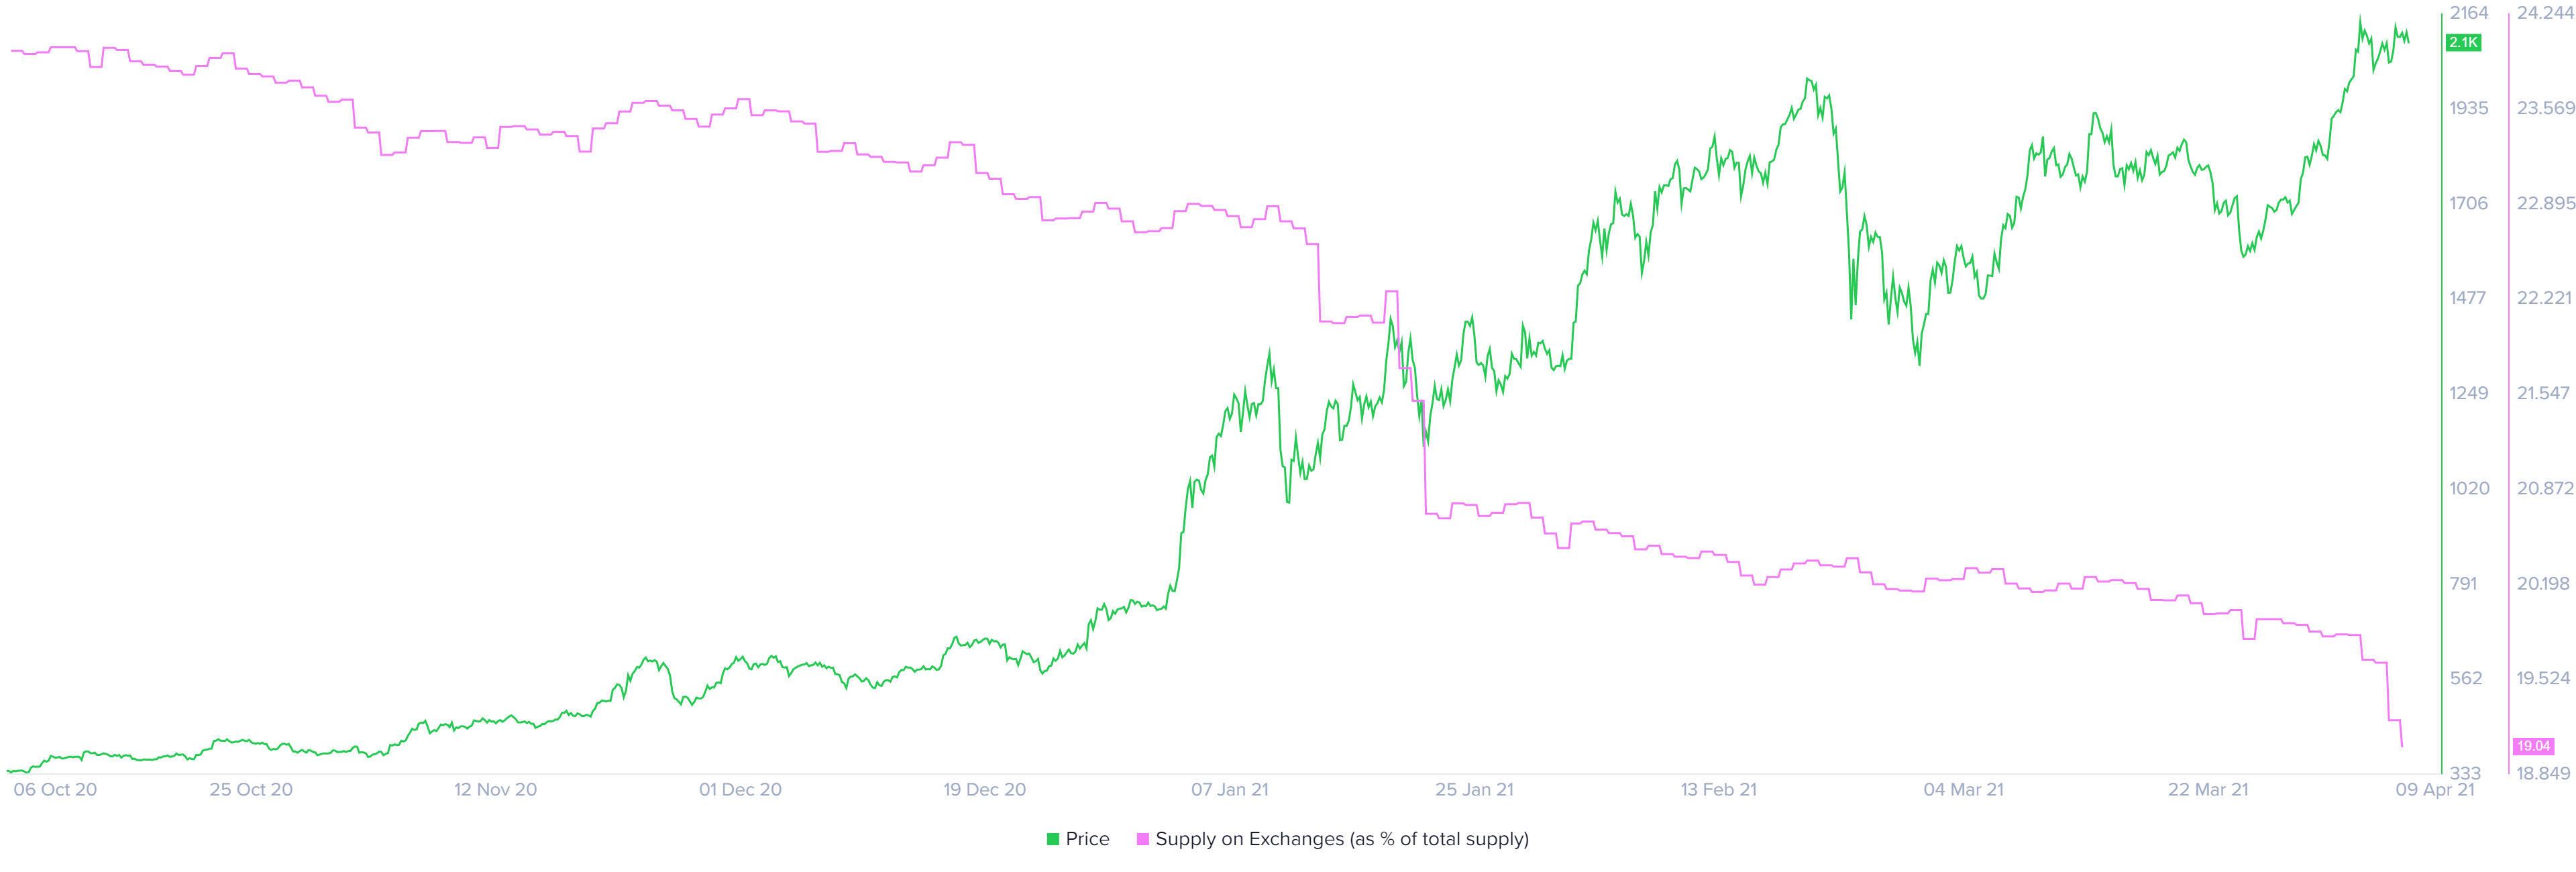 Ethereum supply on exchanges chart